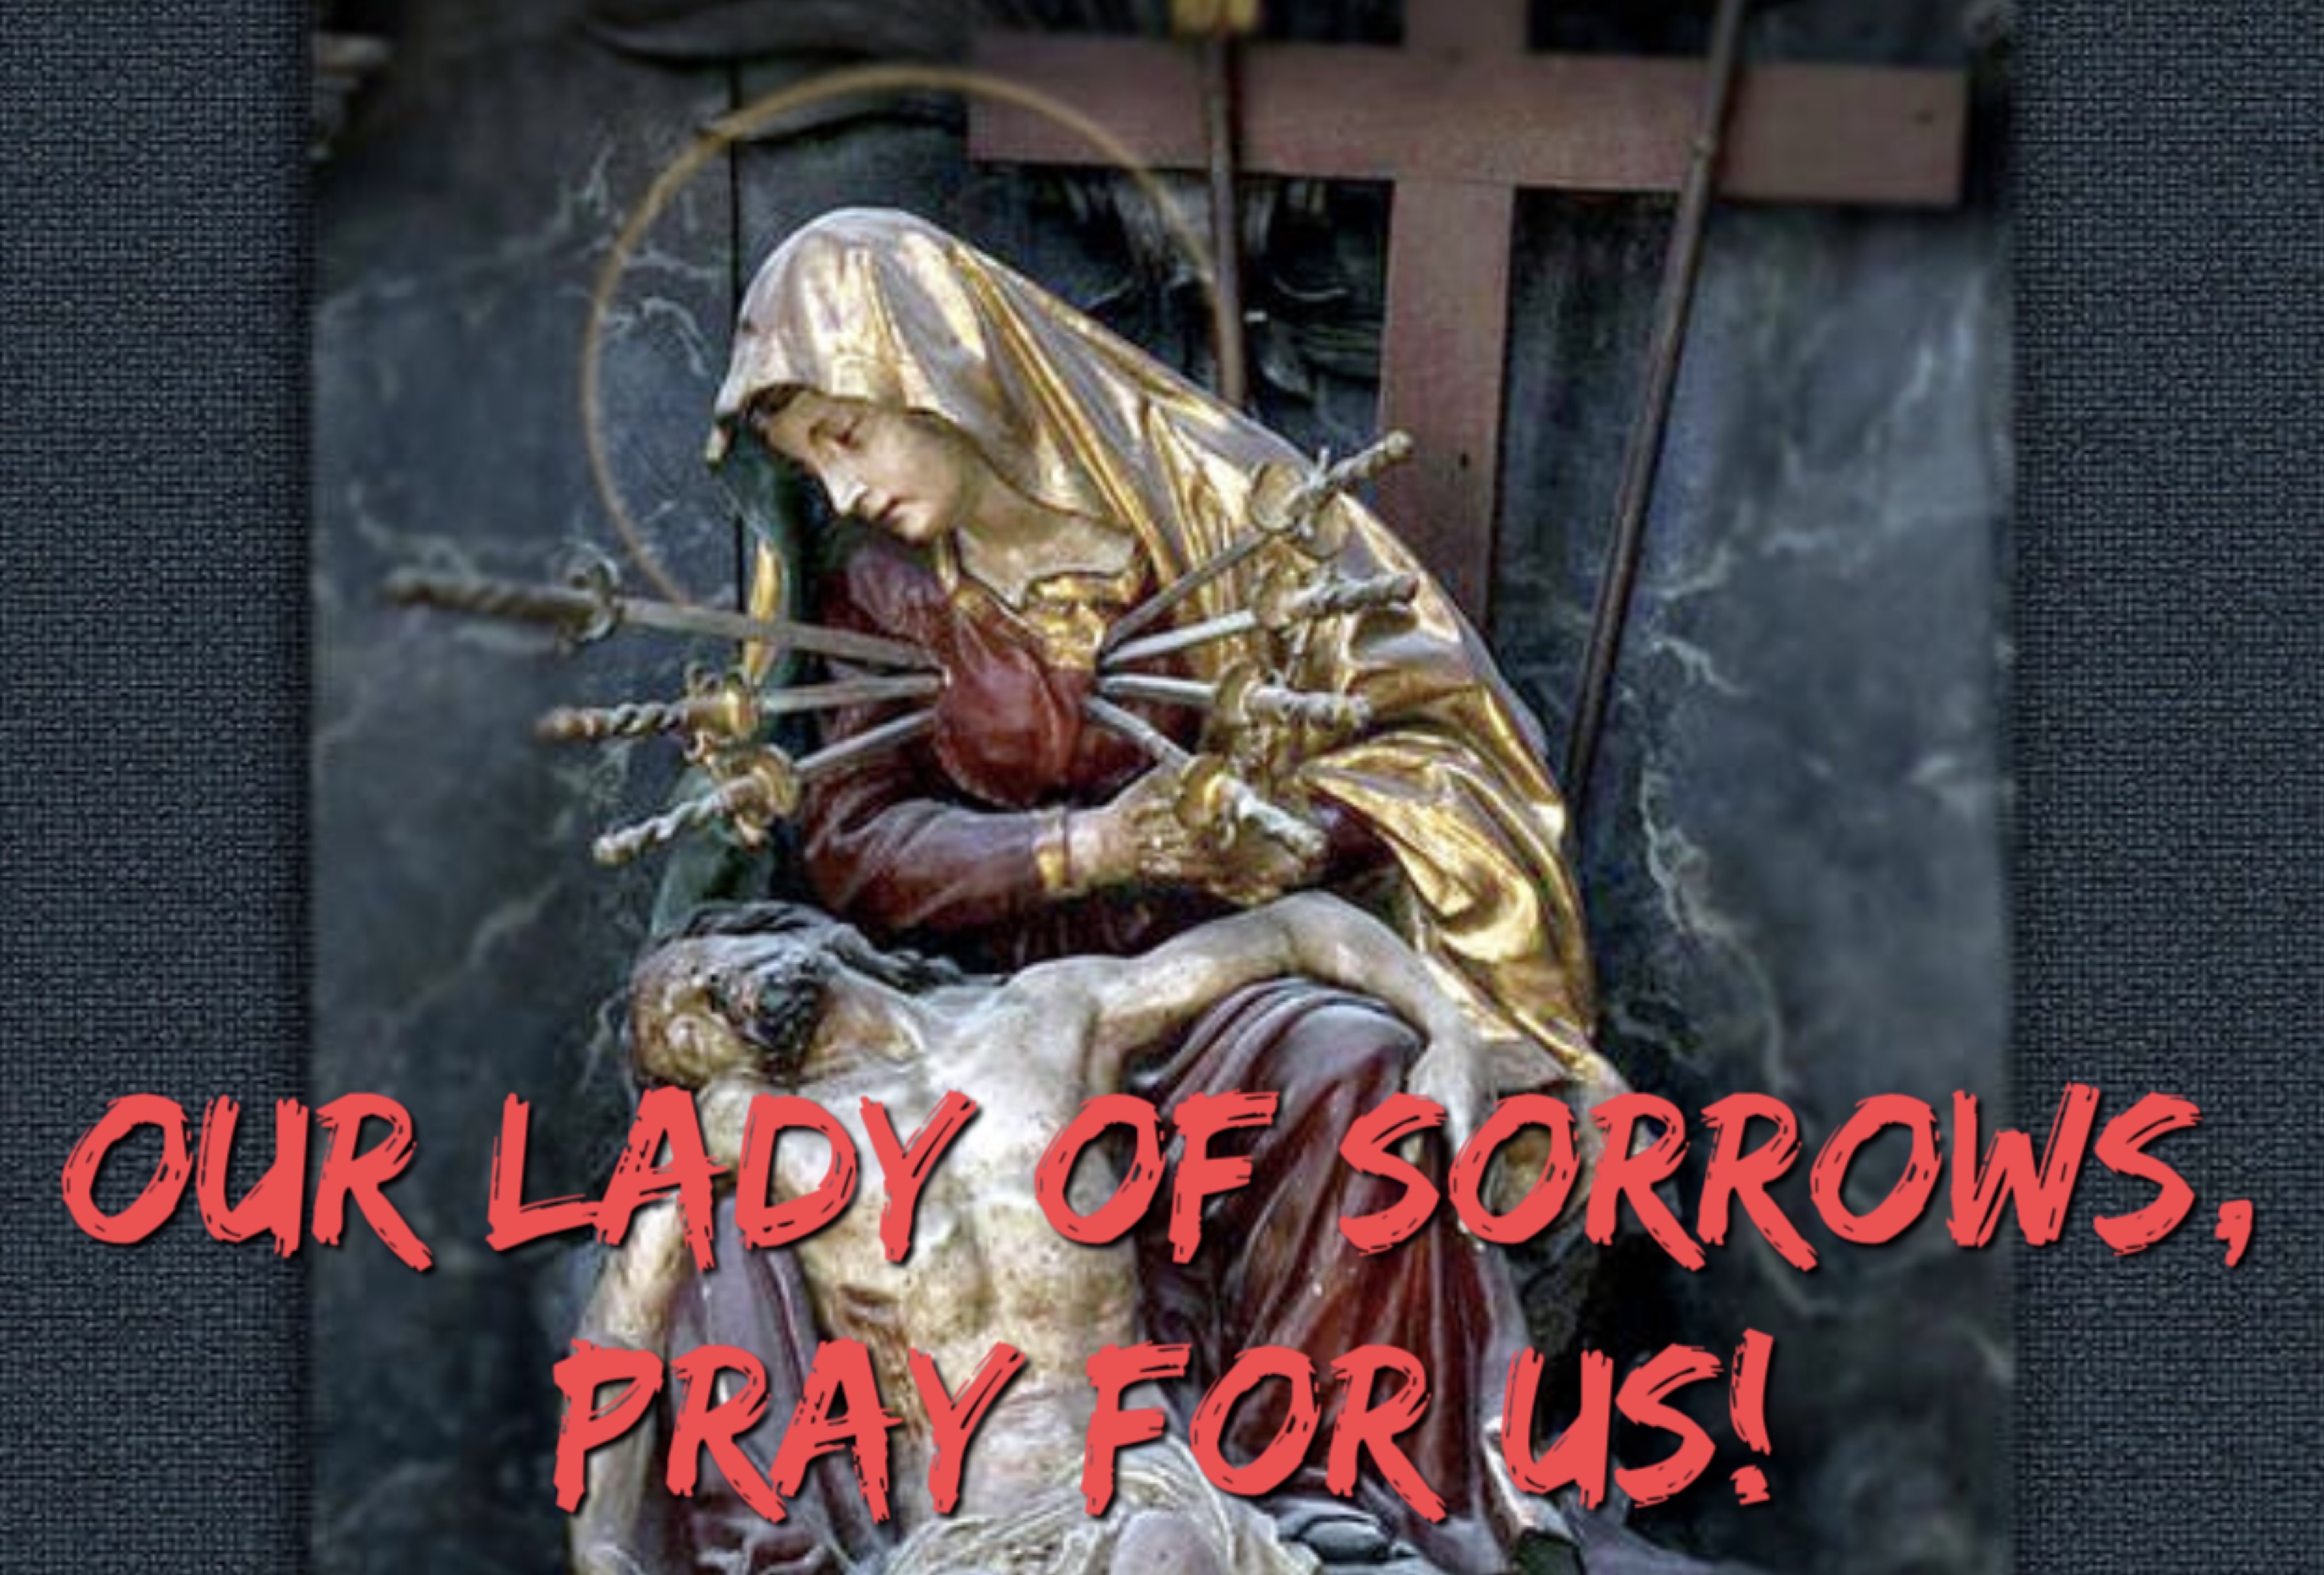 15th September - Our Lady of Sorrows 